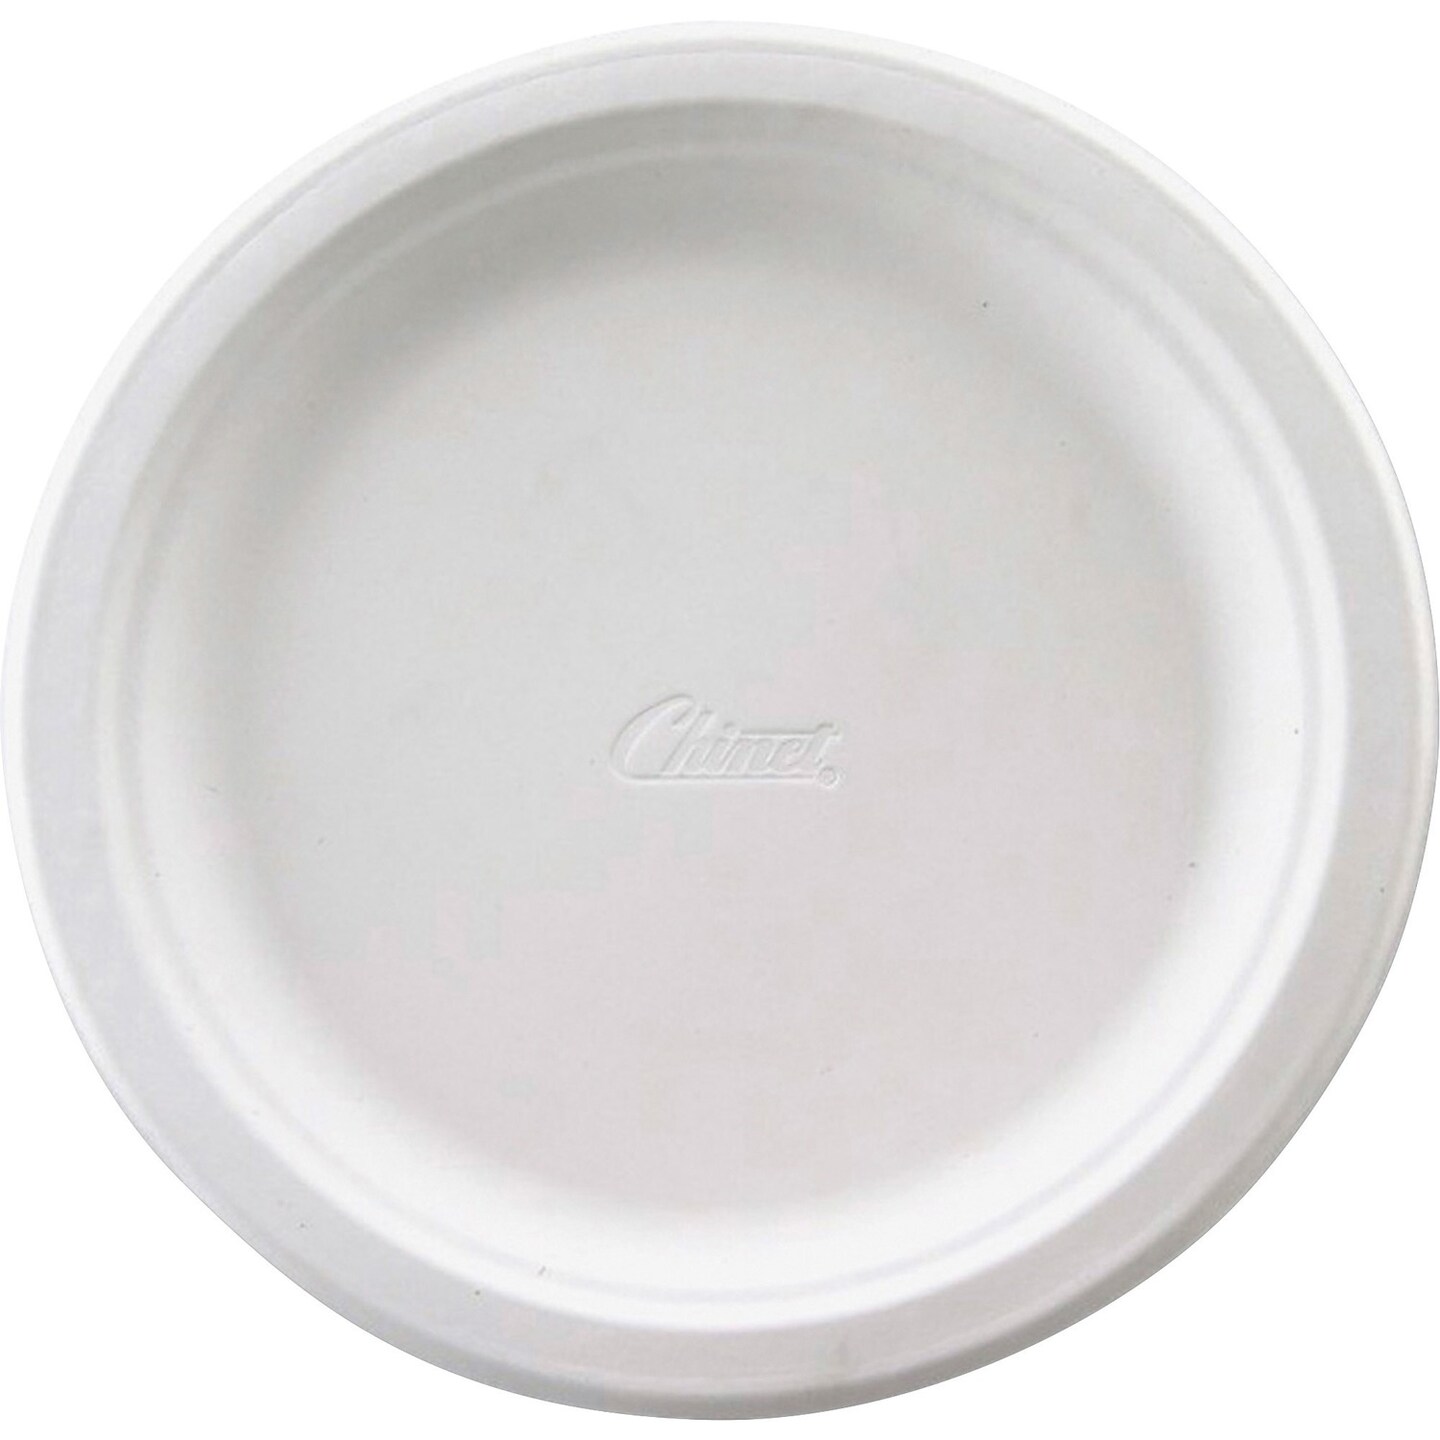 Chinet Classic Paper Plates, 8 3/4 dia, White, 125/Pack